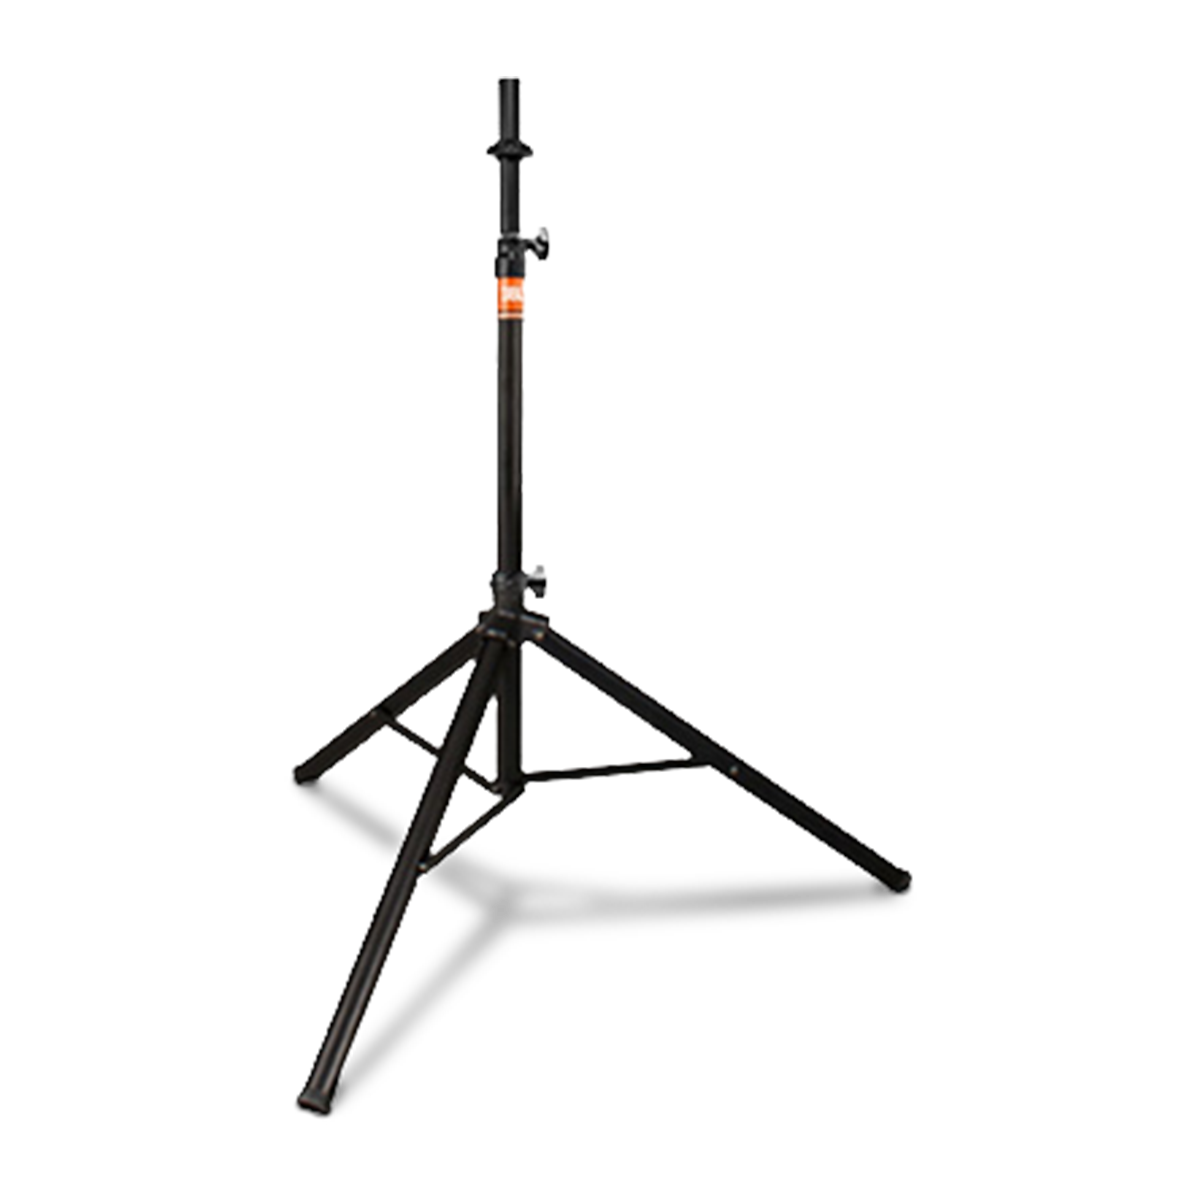 JBL Tripod Stand (Manual Assist) - Black - Aluminum Tripod Speaker Stand with Secure Locking Pin and 150 lbs Load Capacity - Hero